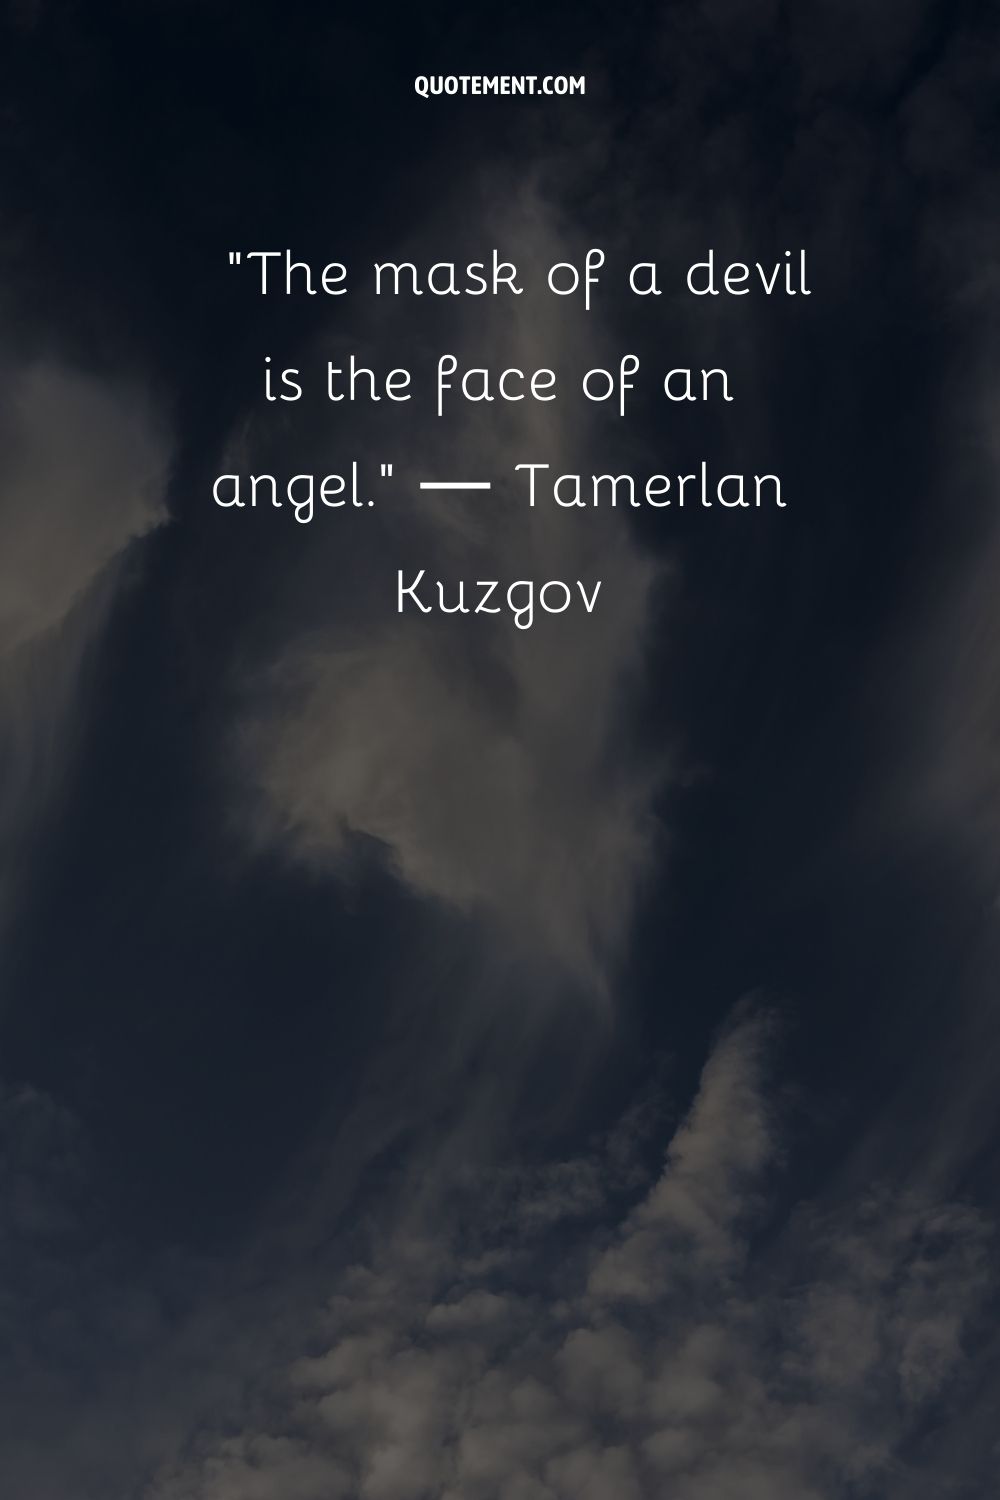 The mask of a devil is the face of an angel.